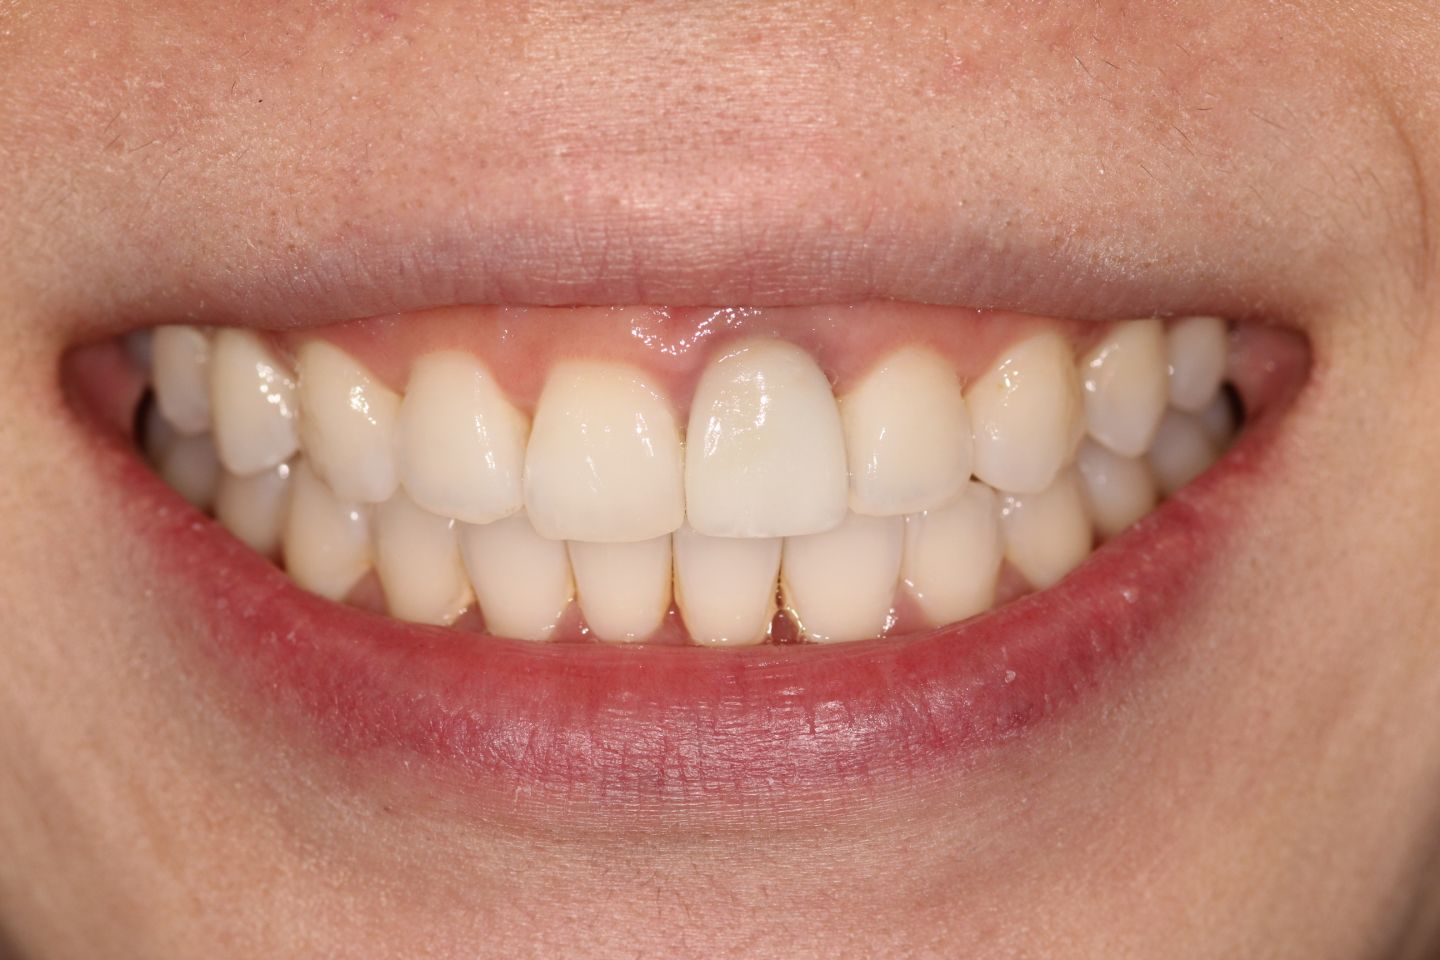 Annabelle - Invisalign, whitening, iTero and crown